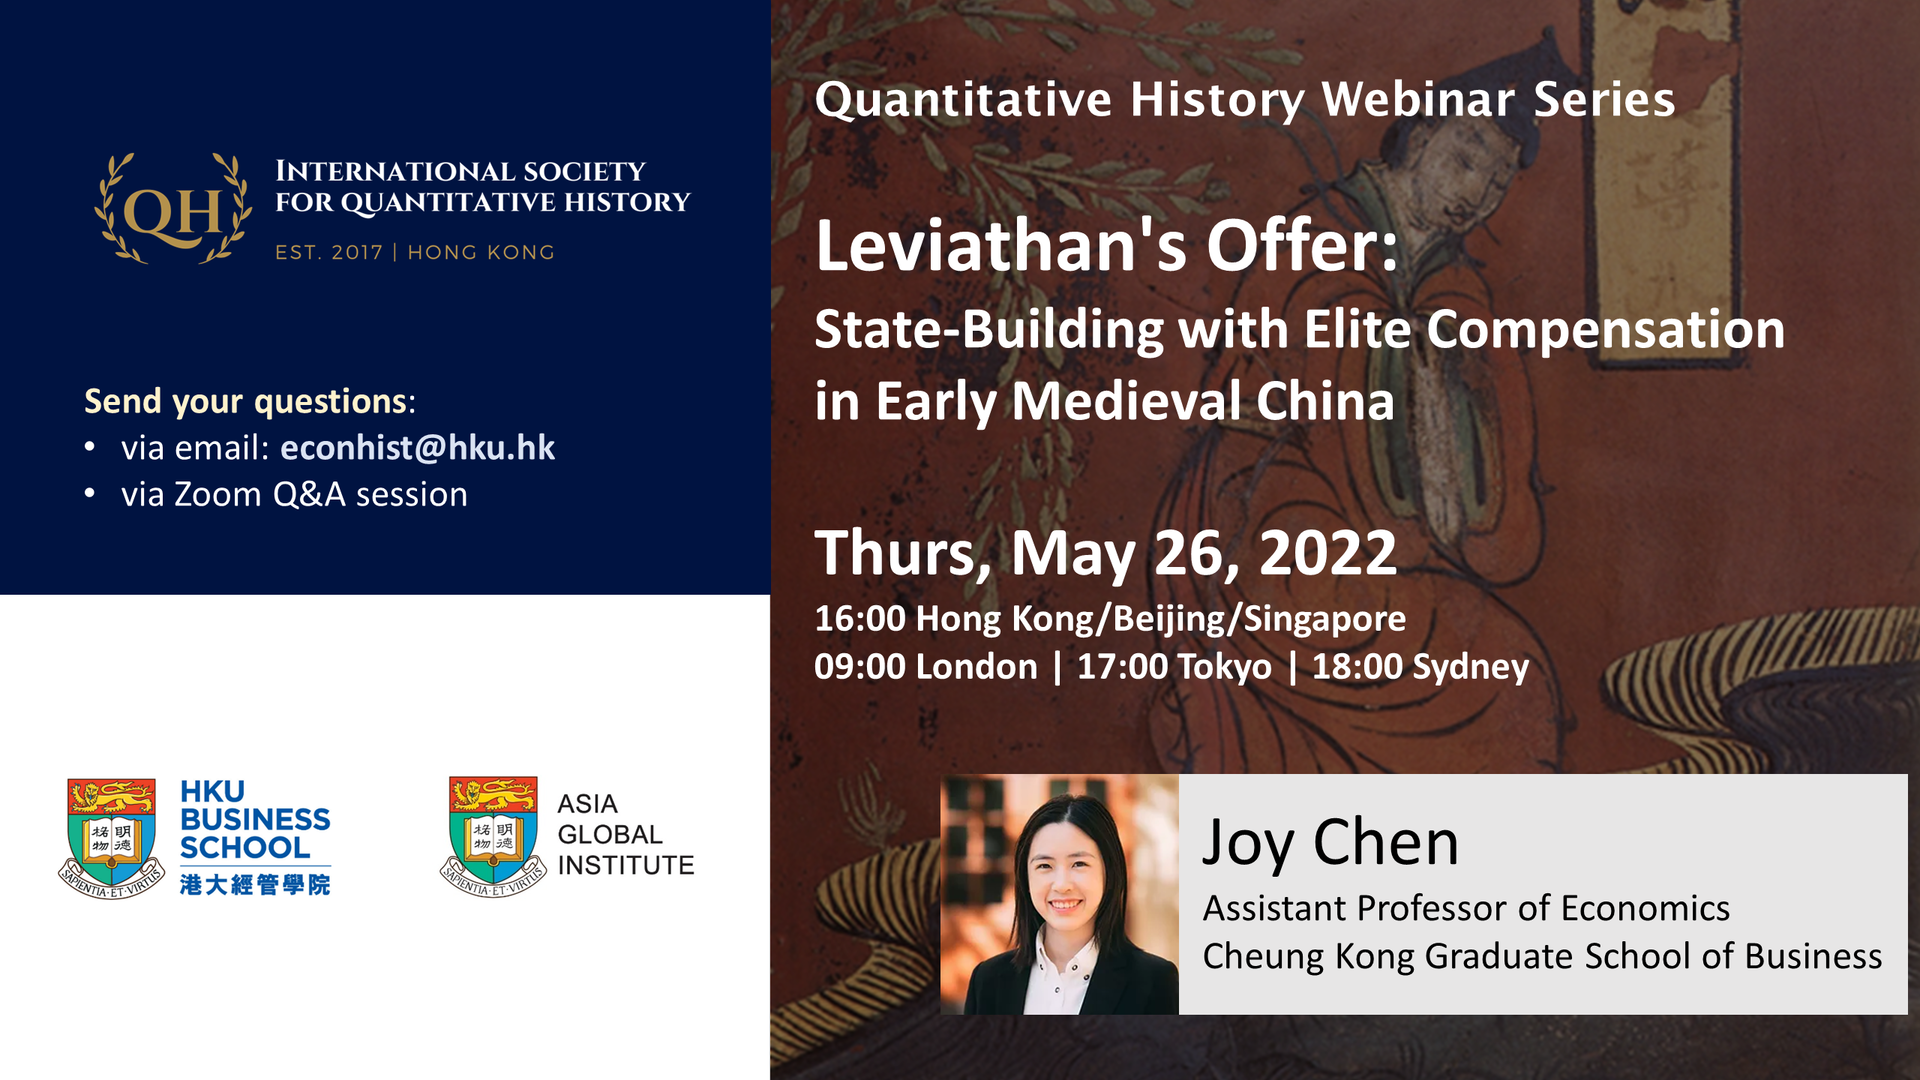 Quantitative History Webinar Series - Leviathan's Offer: State-Building With Elite Compensation In Early Medieval China by Joy Chen 